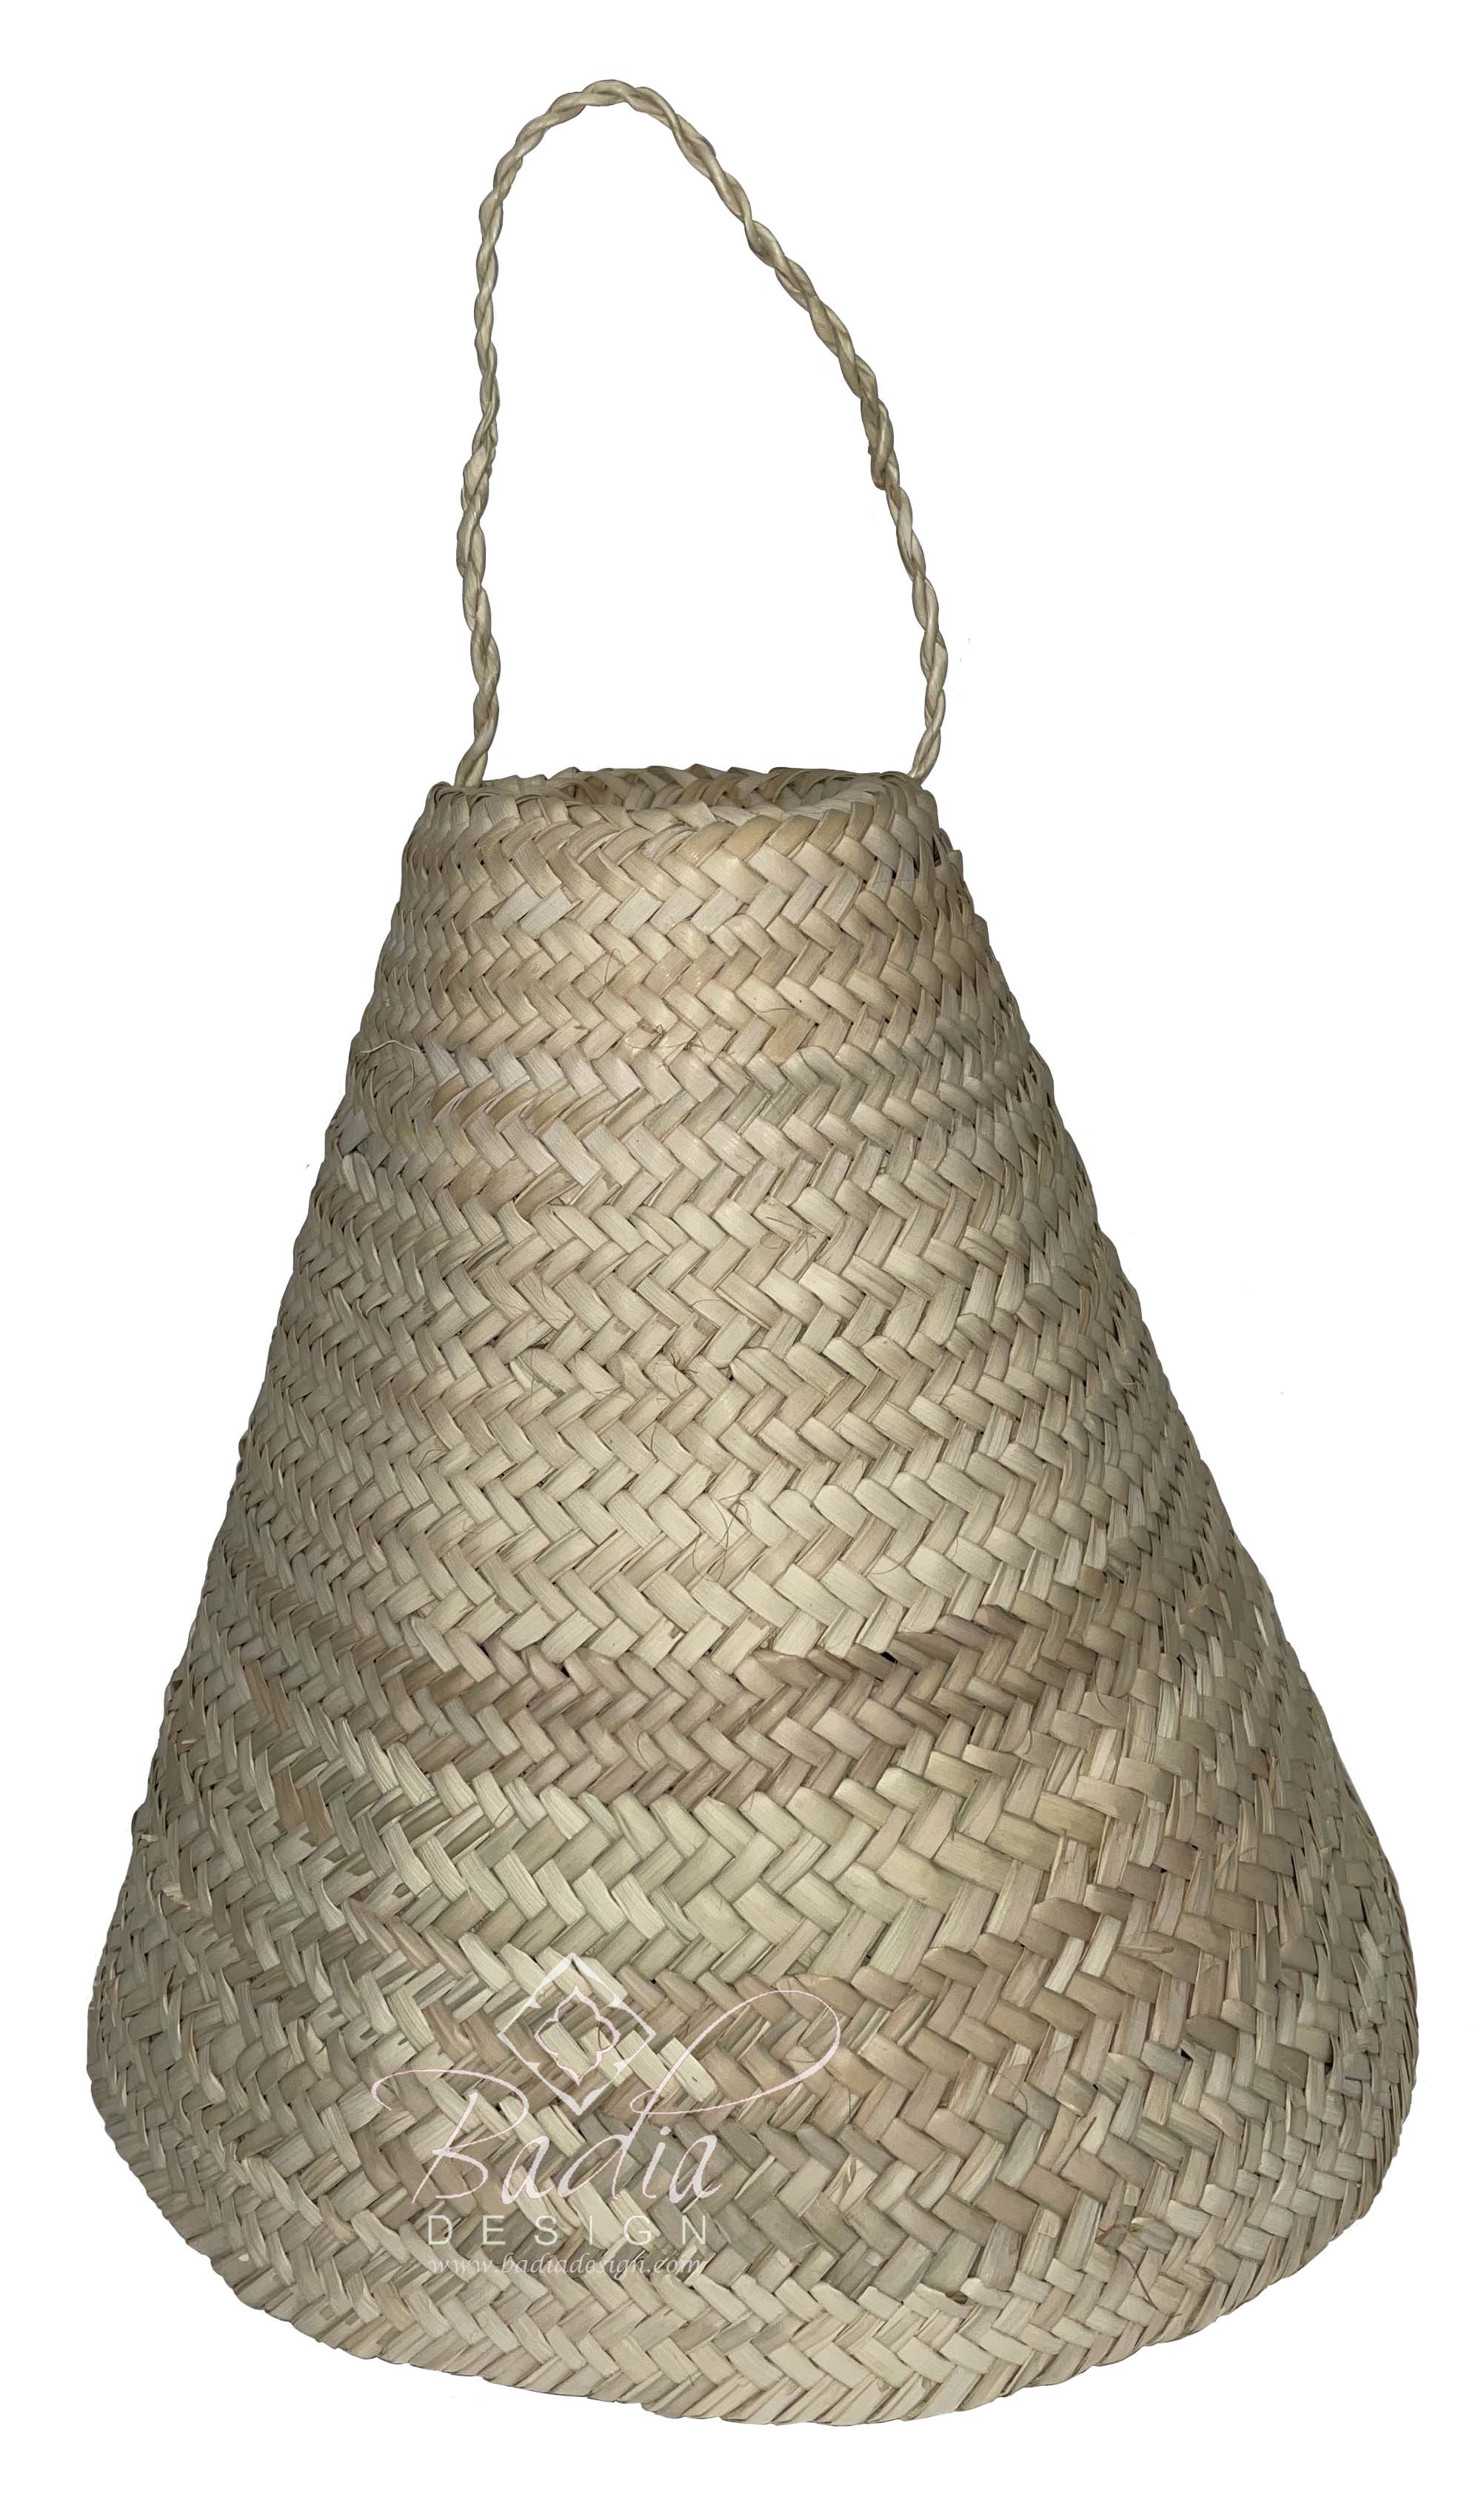 moroccan-dome-shaped-handwoven-straw-basket-hb021-1.jpg